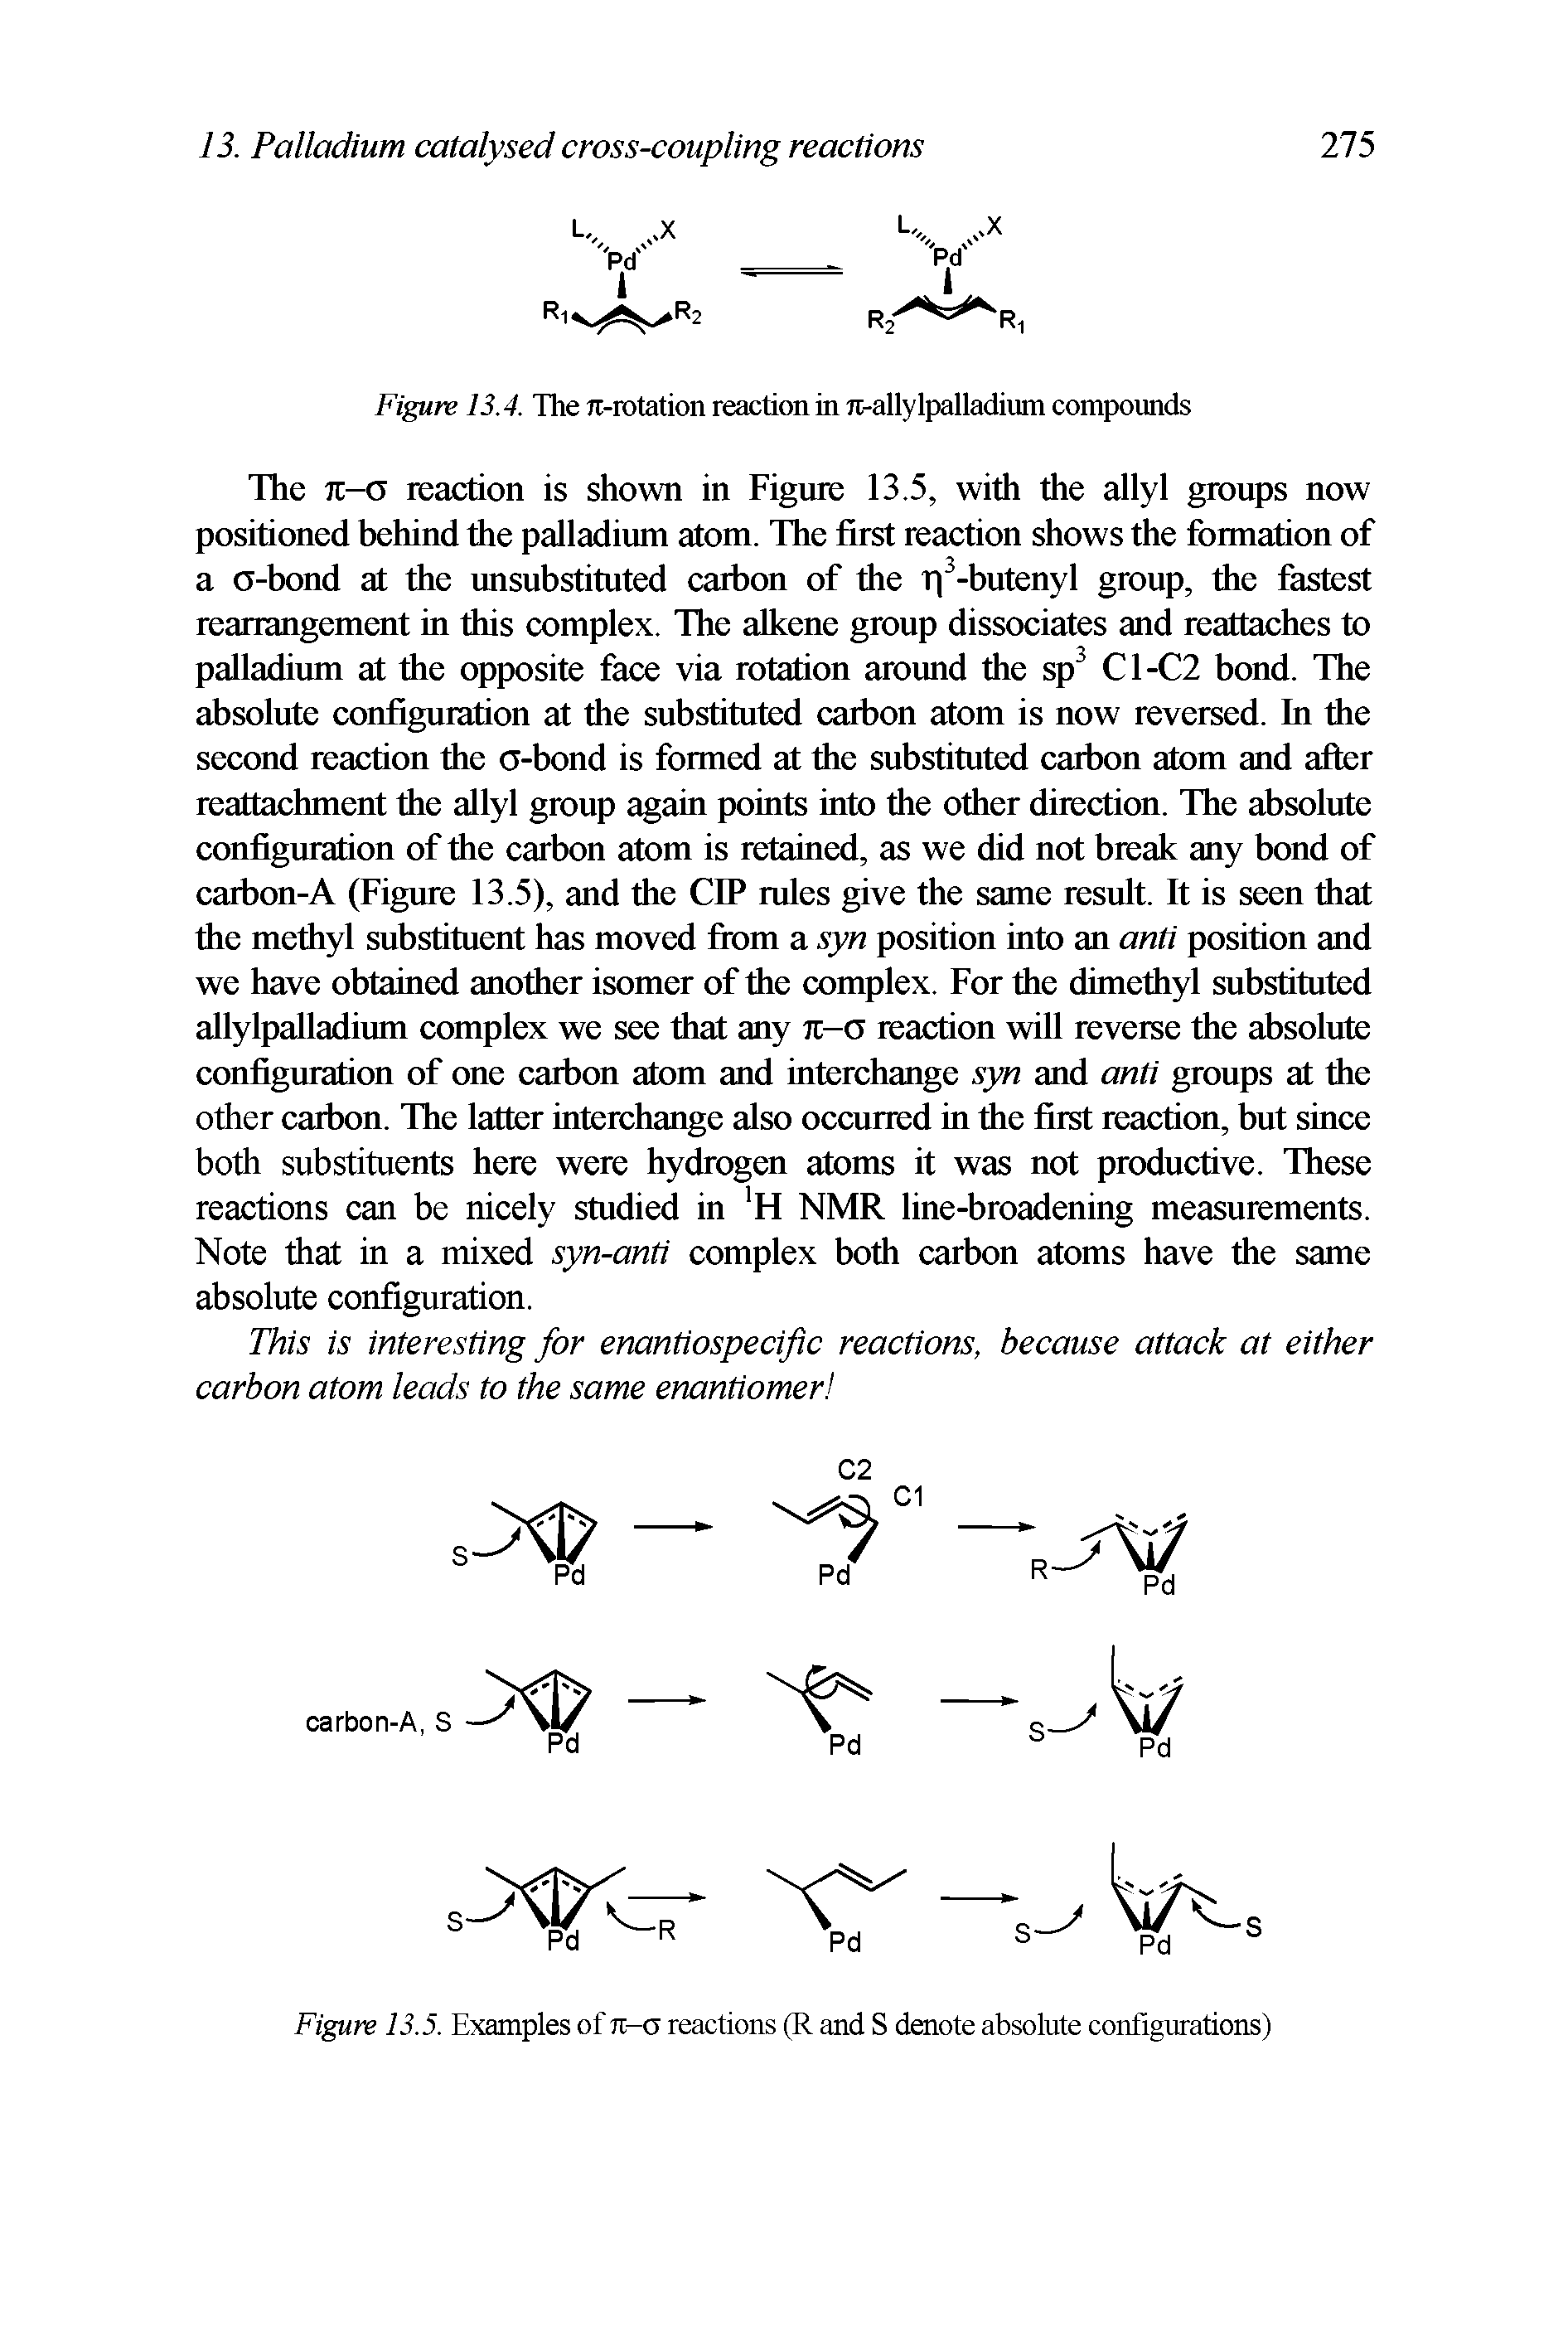 Figure 13.5. Examples of n-o reactions (R and S denote absolute configurations)...